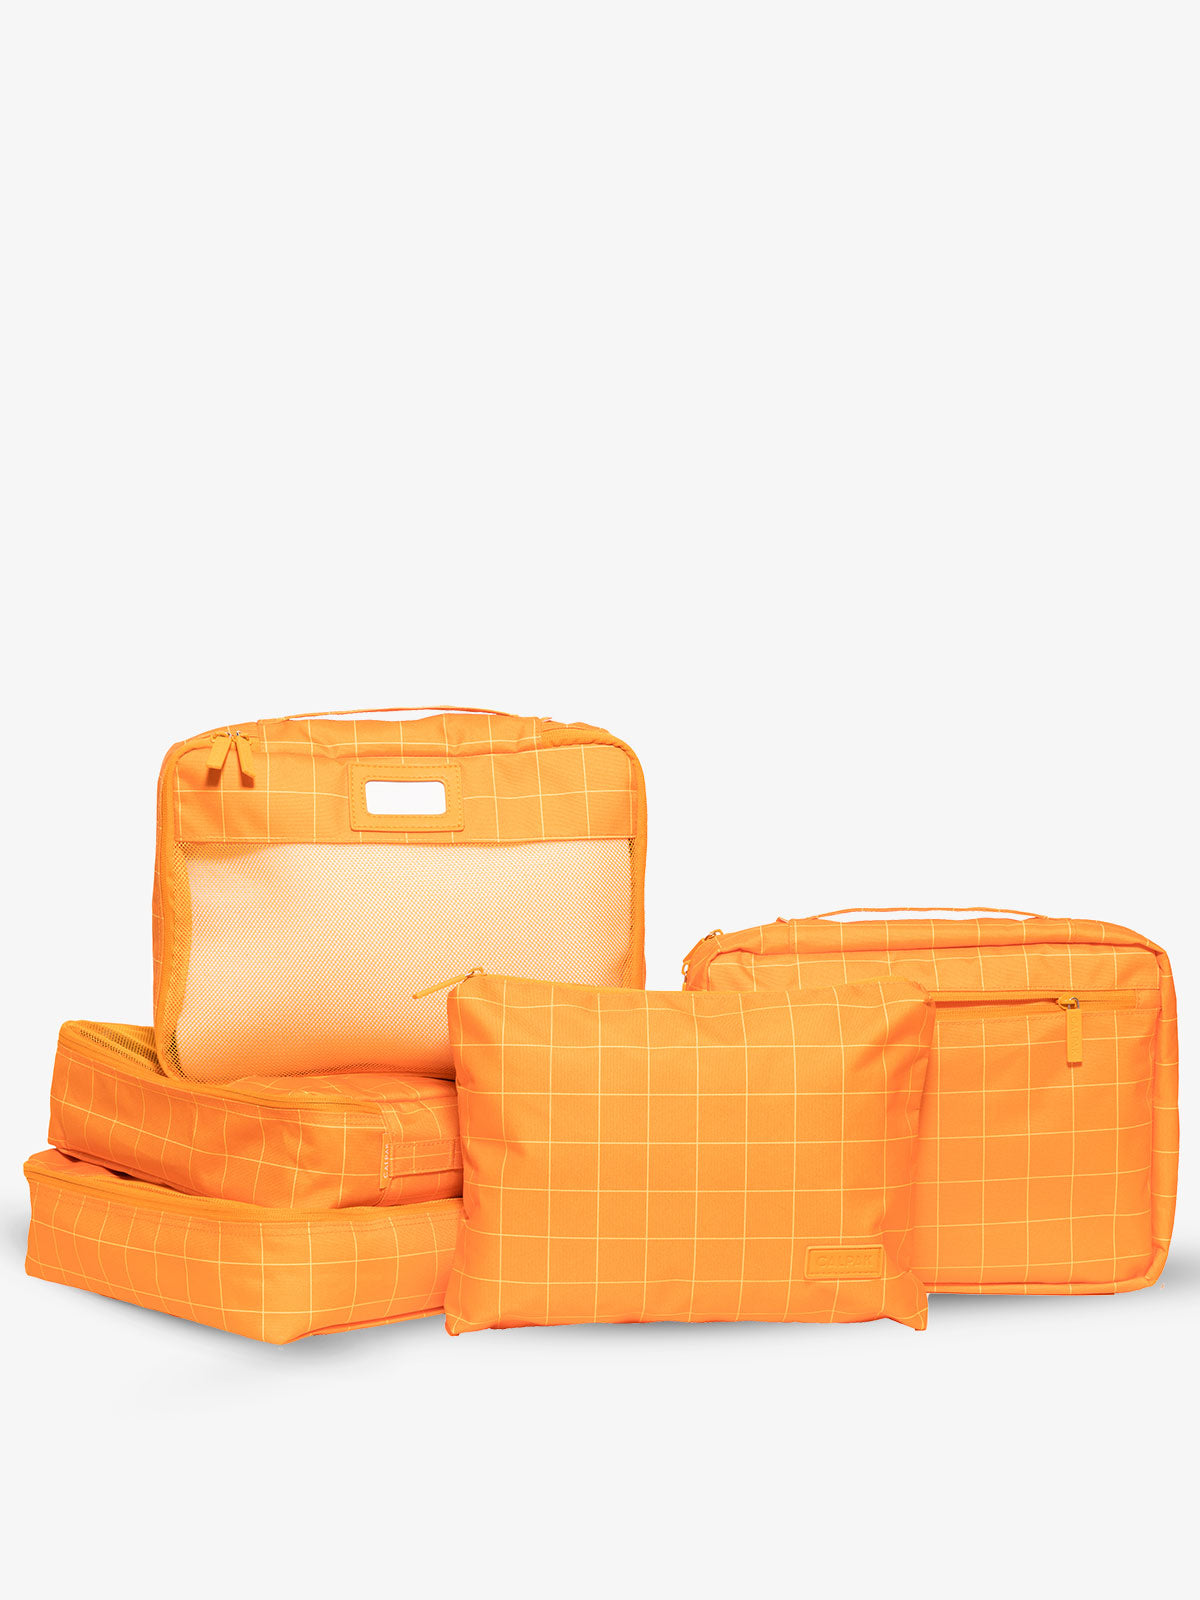 CALPAK 5 piece set packing cubes for travel with labels and top handles in orange grid